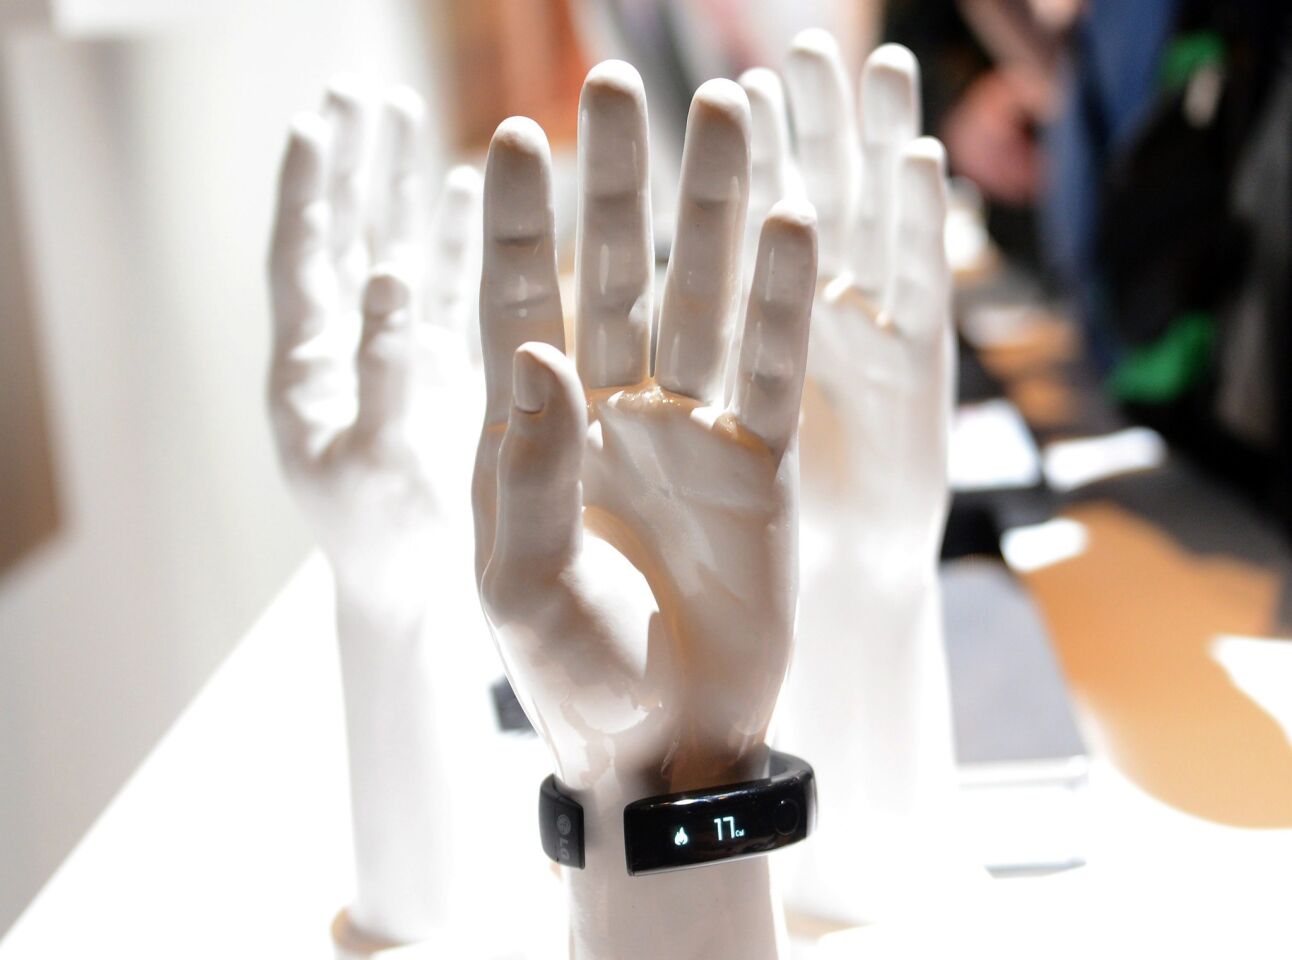 The LG Lifeband Touch is diplayed during a media presentation at International CES in Las Vegas.